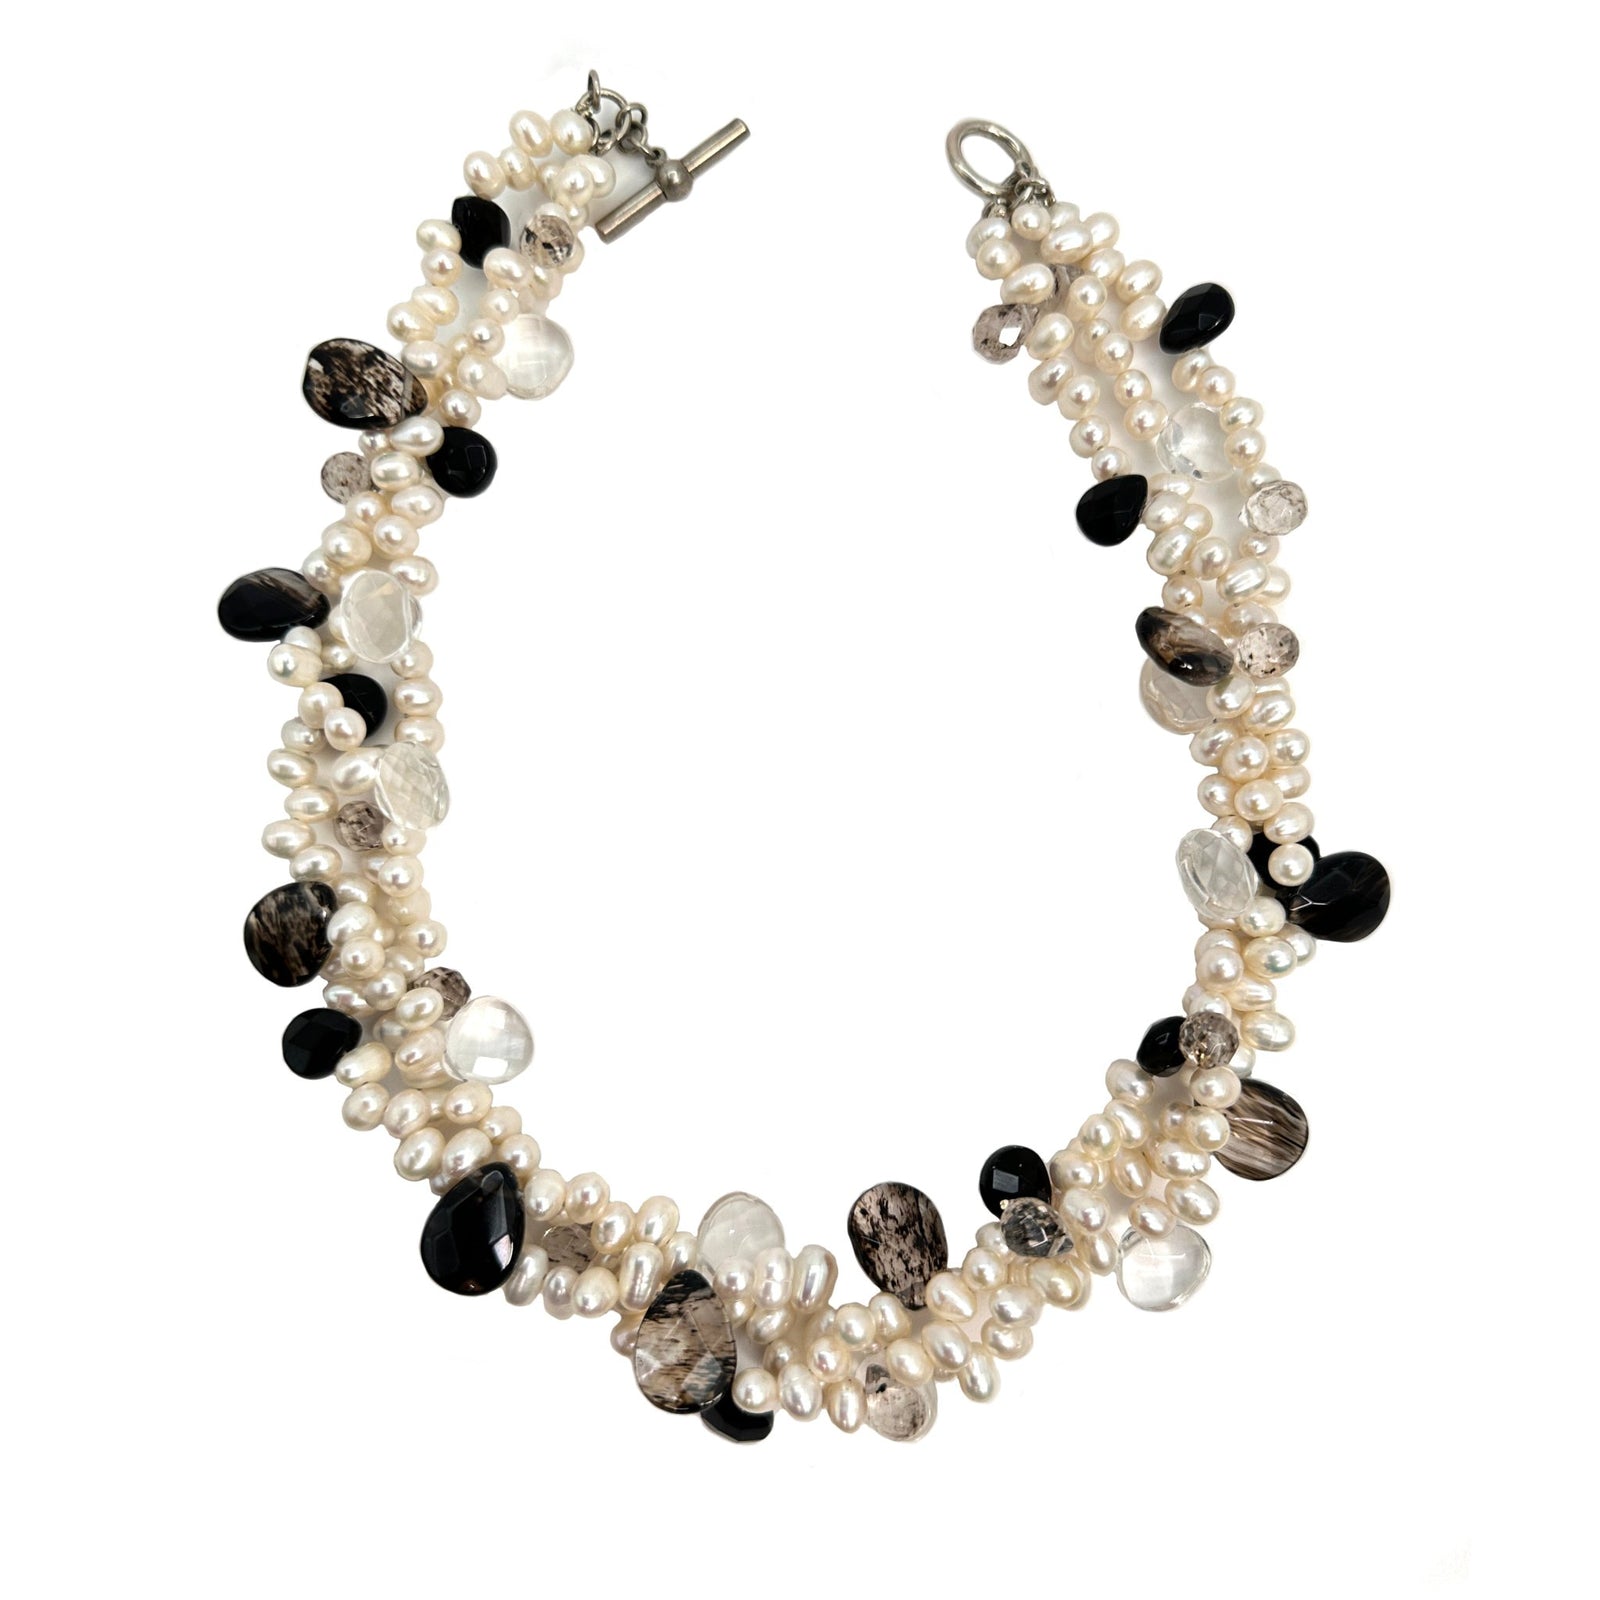 3-Strand Large Pearl Necklace - Erica Zap Designs